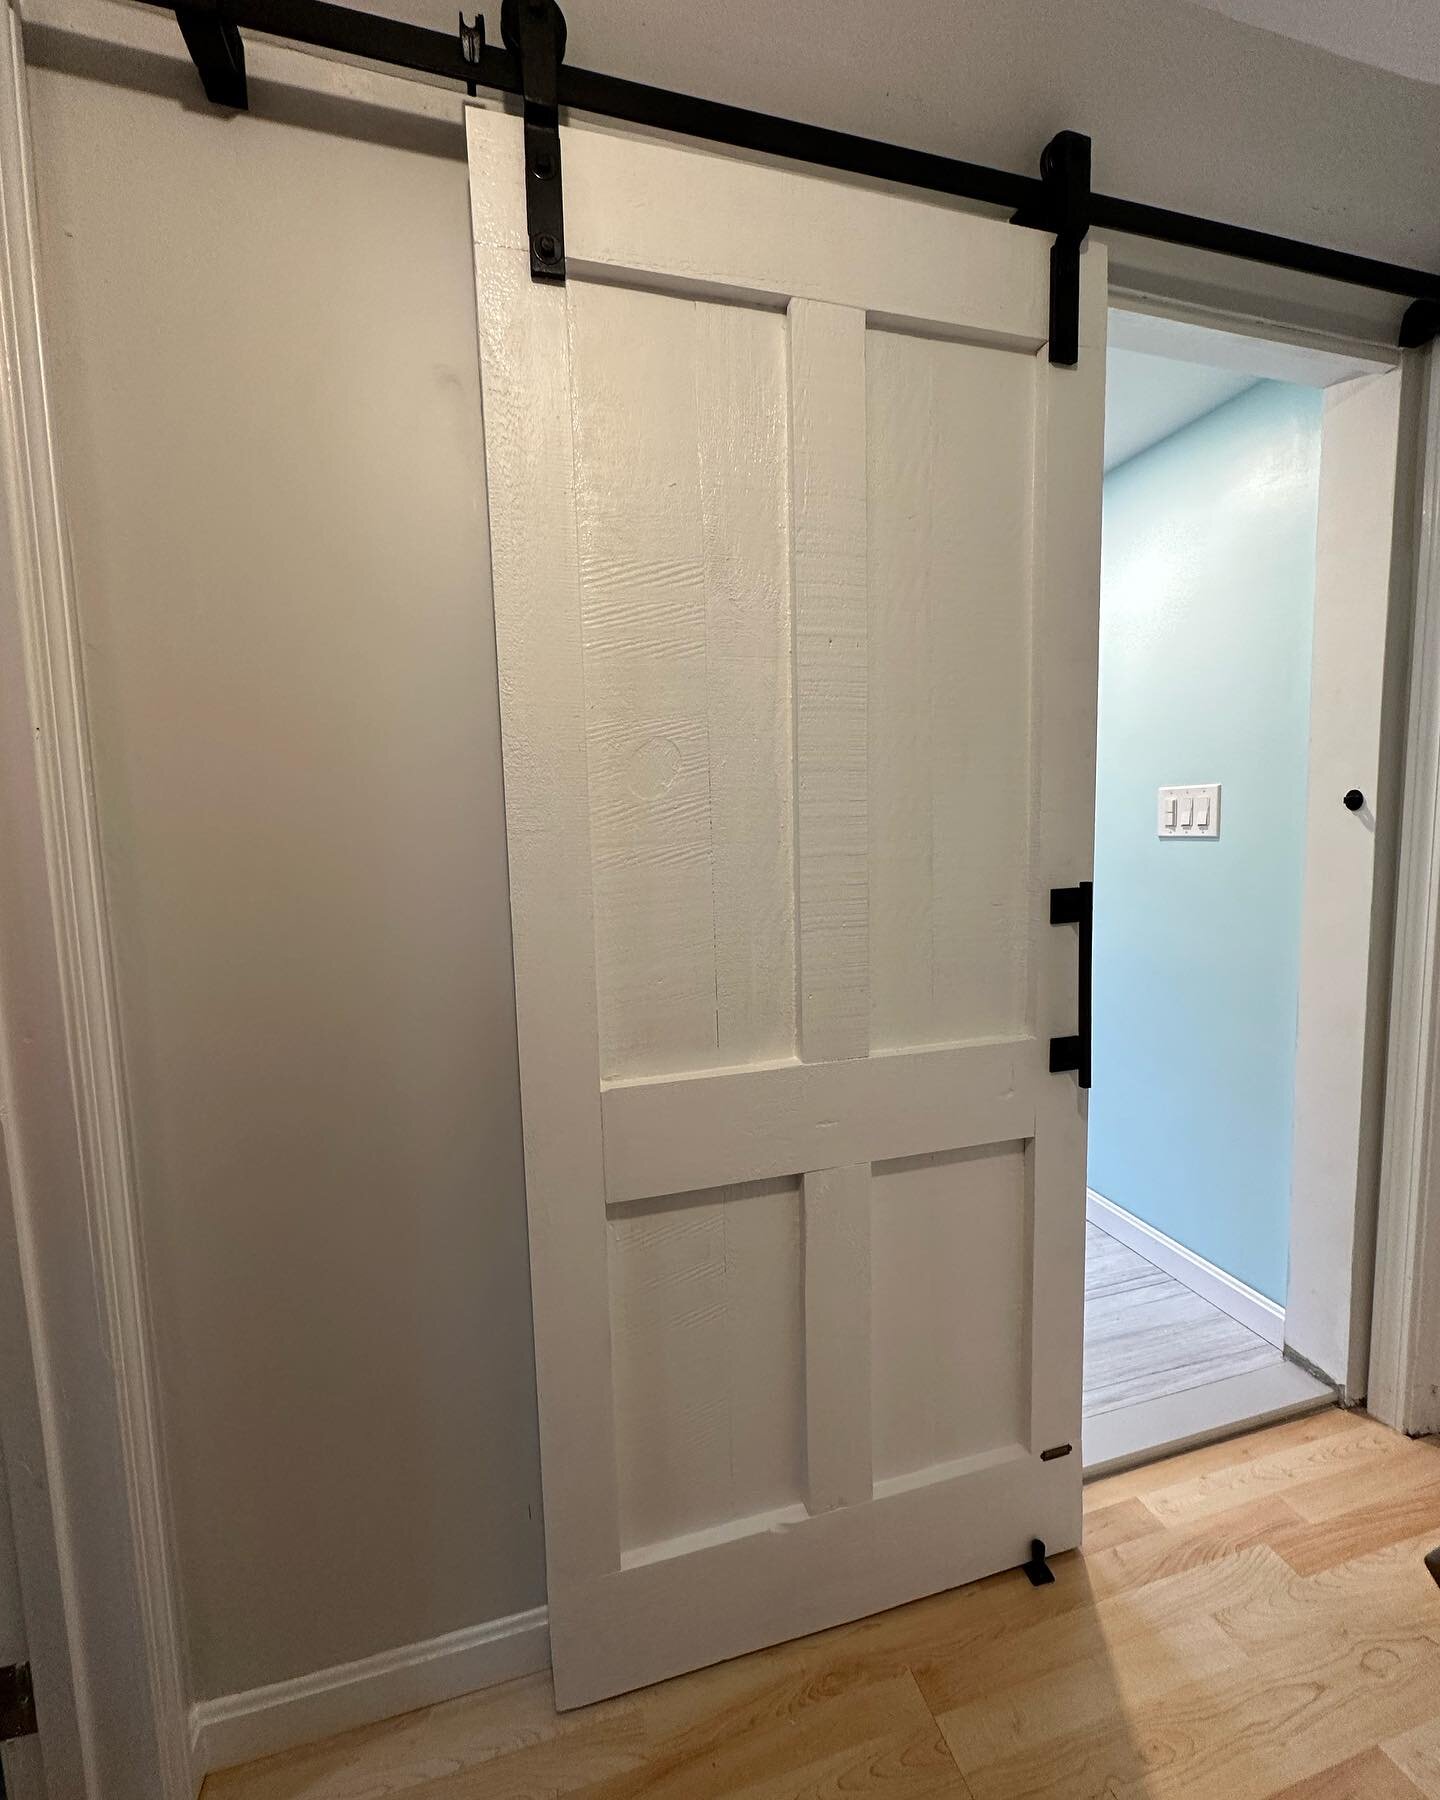 Chris and Anna of Reading were referred by an awesome tile expert named Tony who we did a barn door for years ago.

Anyway, this white door close matches the style of other doors in a tight upstairs hall and small bathroom entry that Tony renovated f